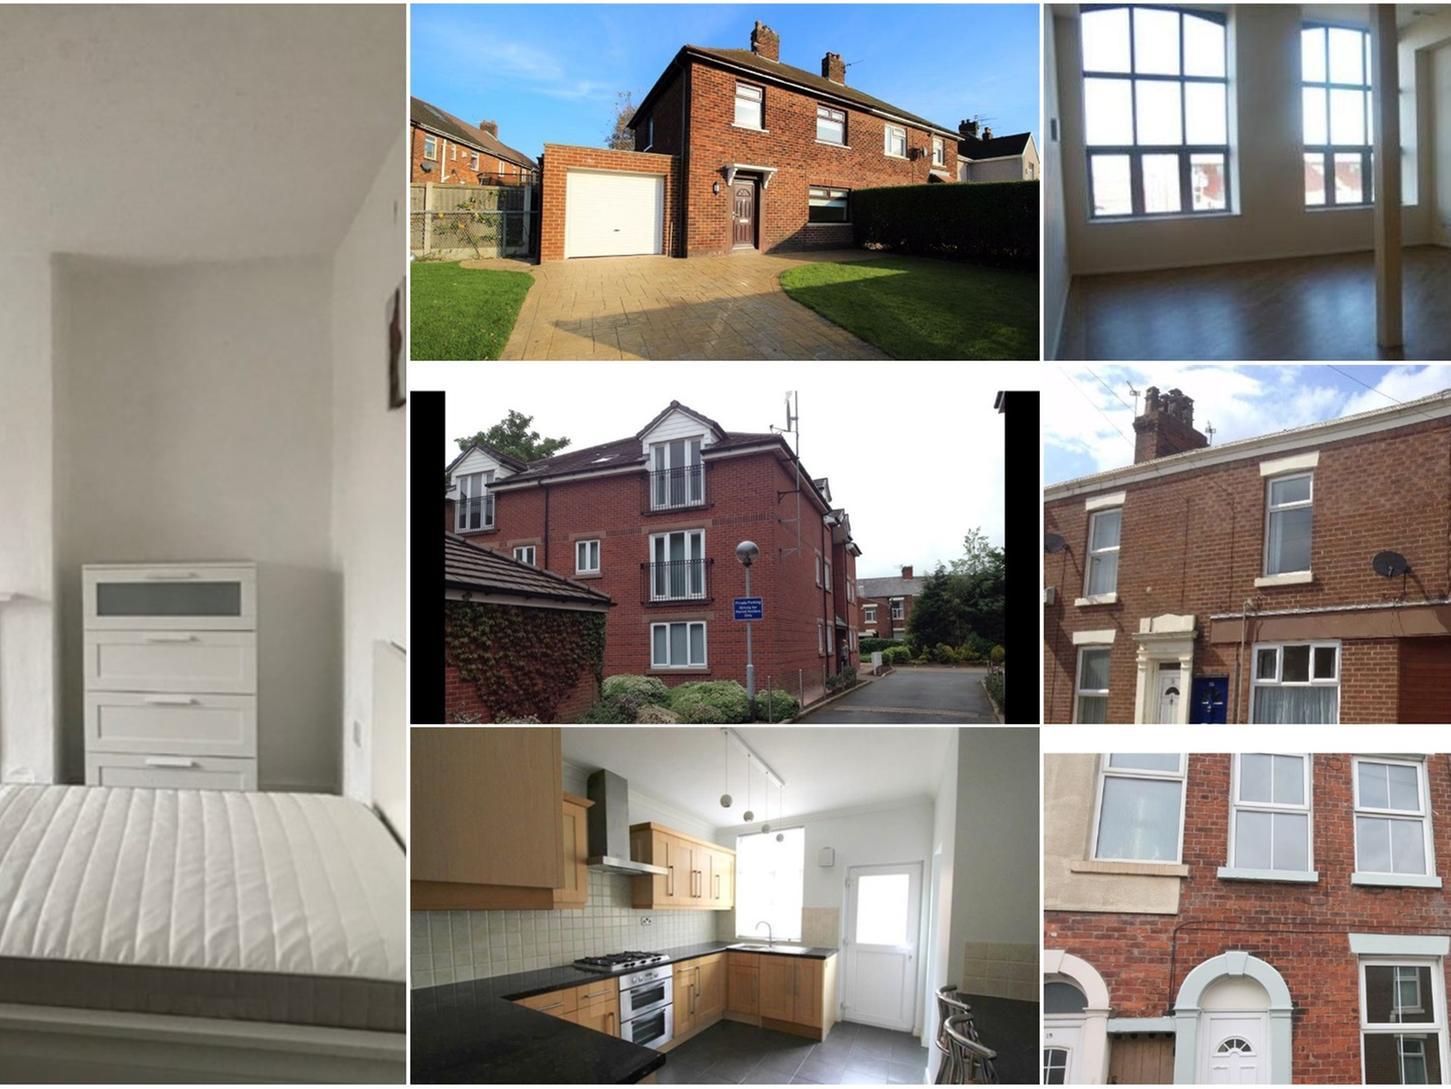 These are the 10 most viewed properties to rent in Preston according to Zoopla